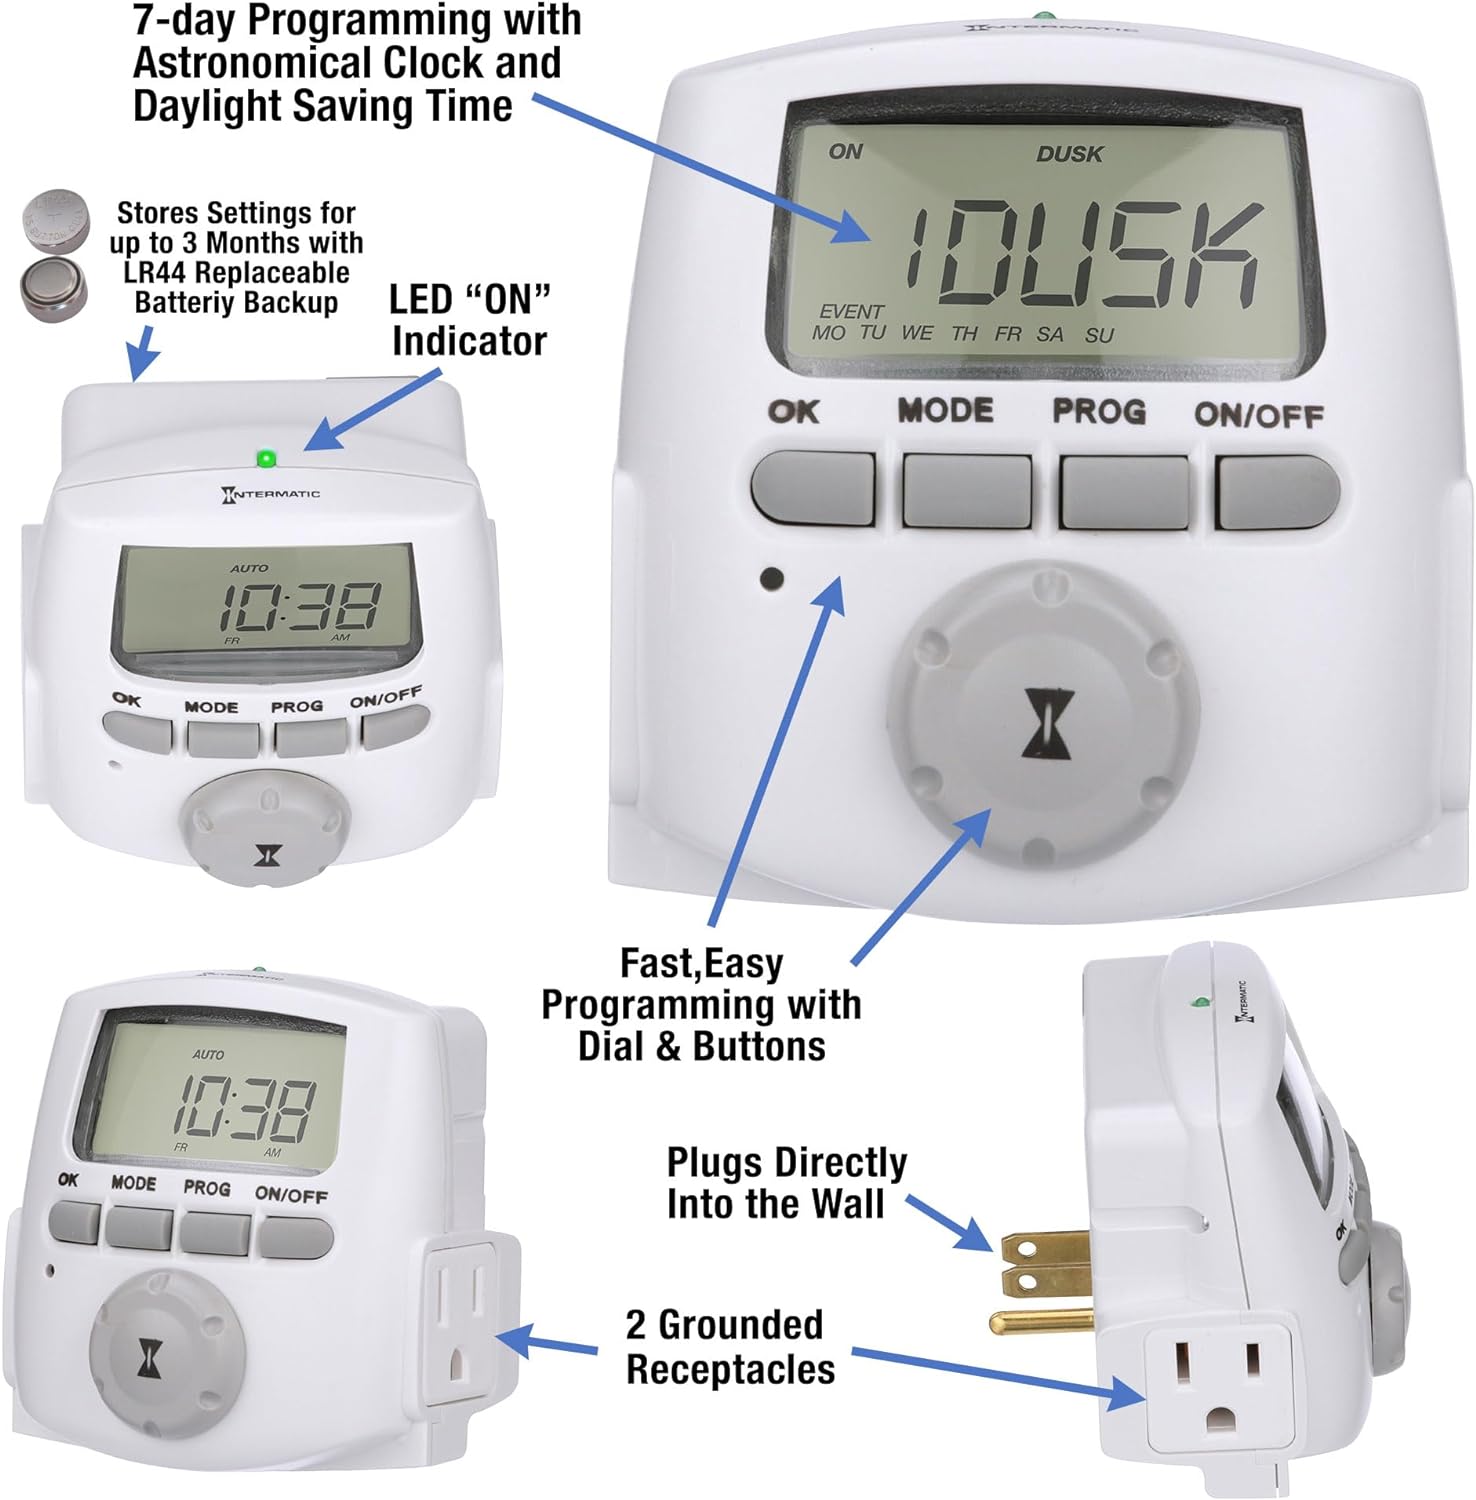 Intermatic Digital Timer, DT620, white, functions